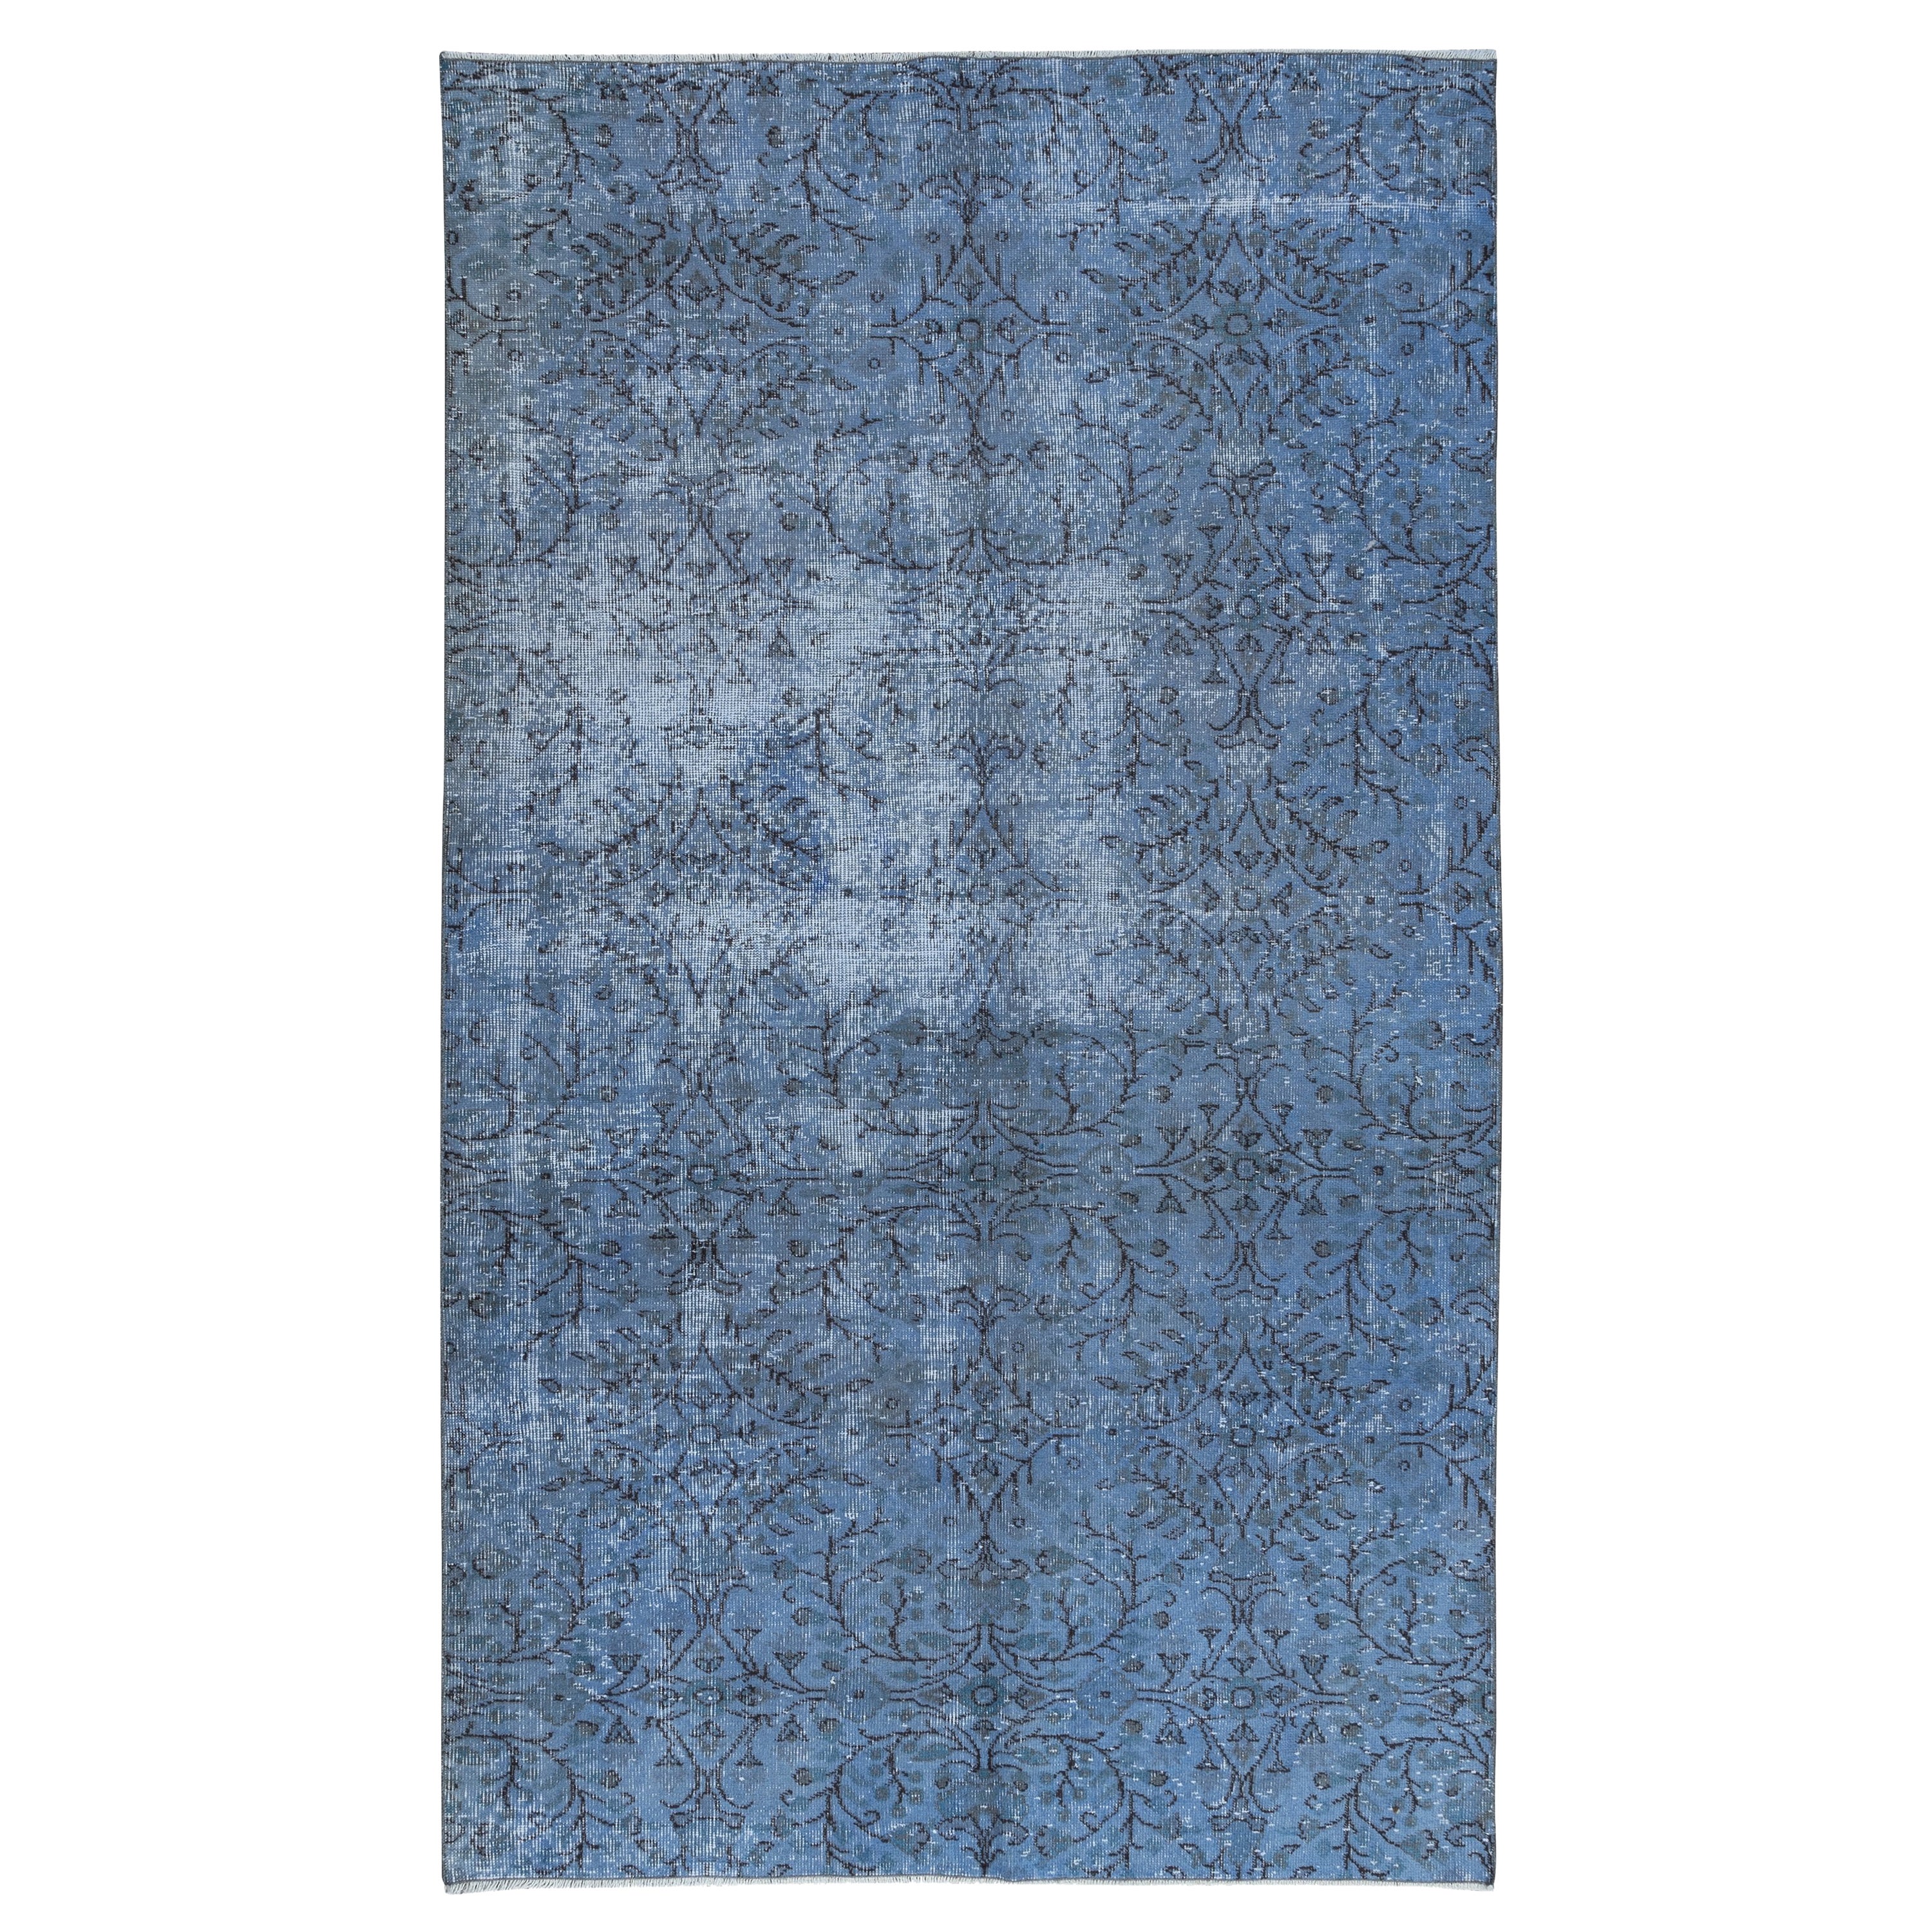 5.4x9 Ft Sky Blue Modern Area Rug, Handwoven and Handknotted in Isparta, Turkey.